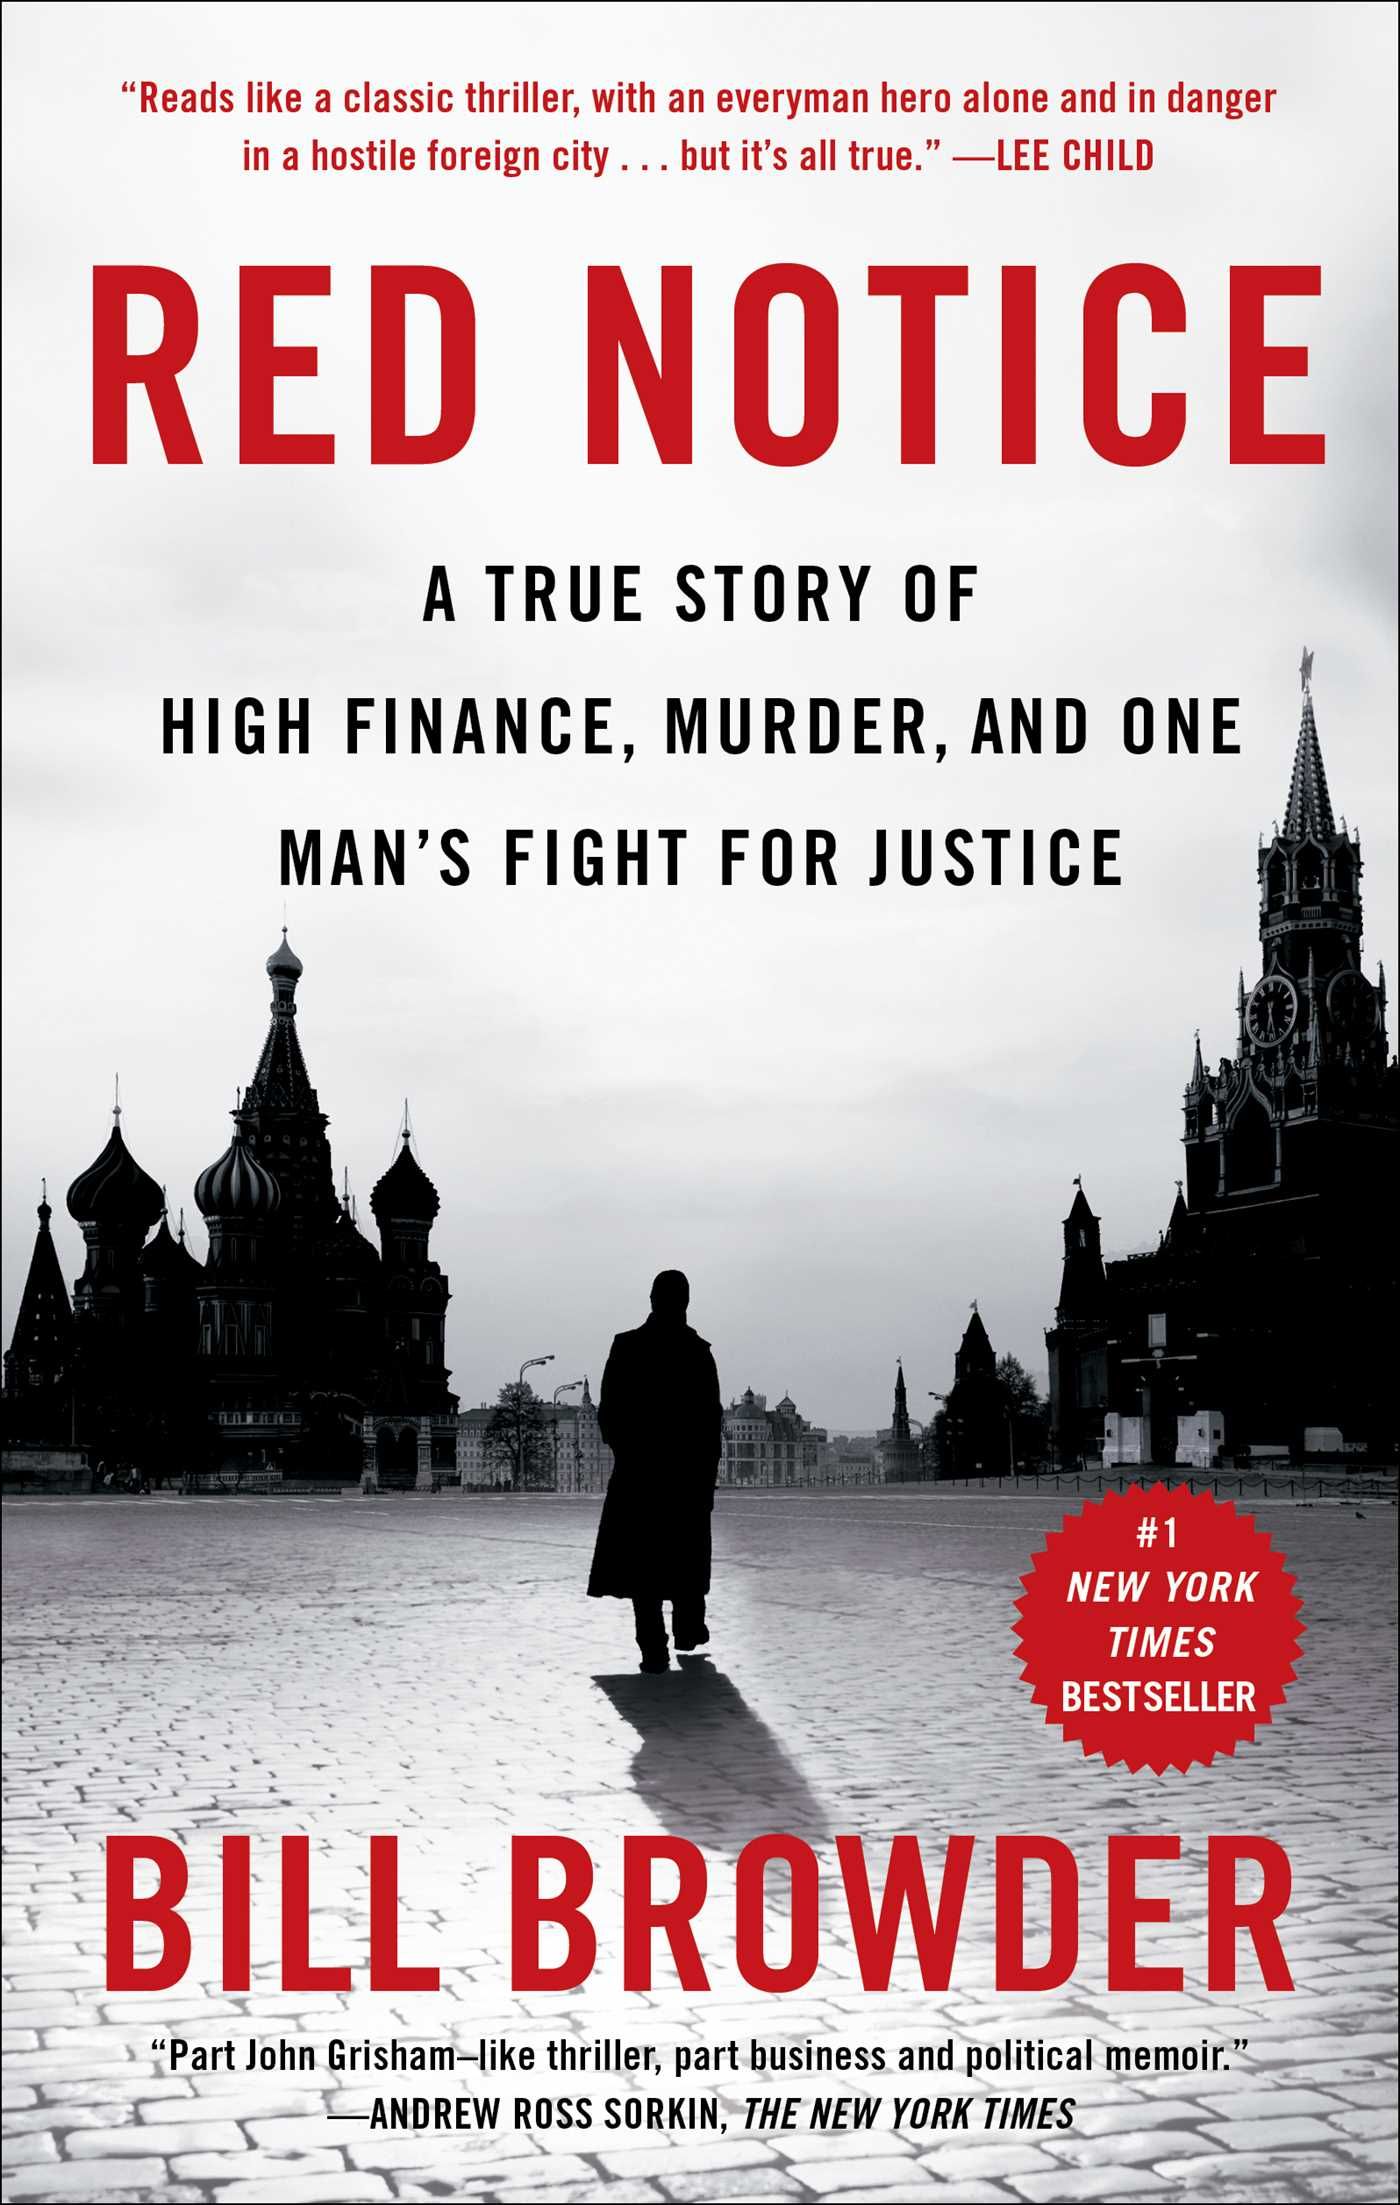 Red Notice, A True Story of High Finance, Murder, and One Man’s Fight for Justice